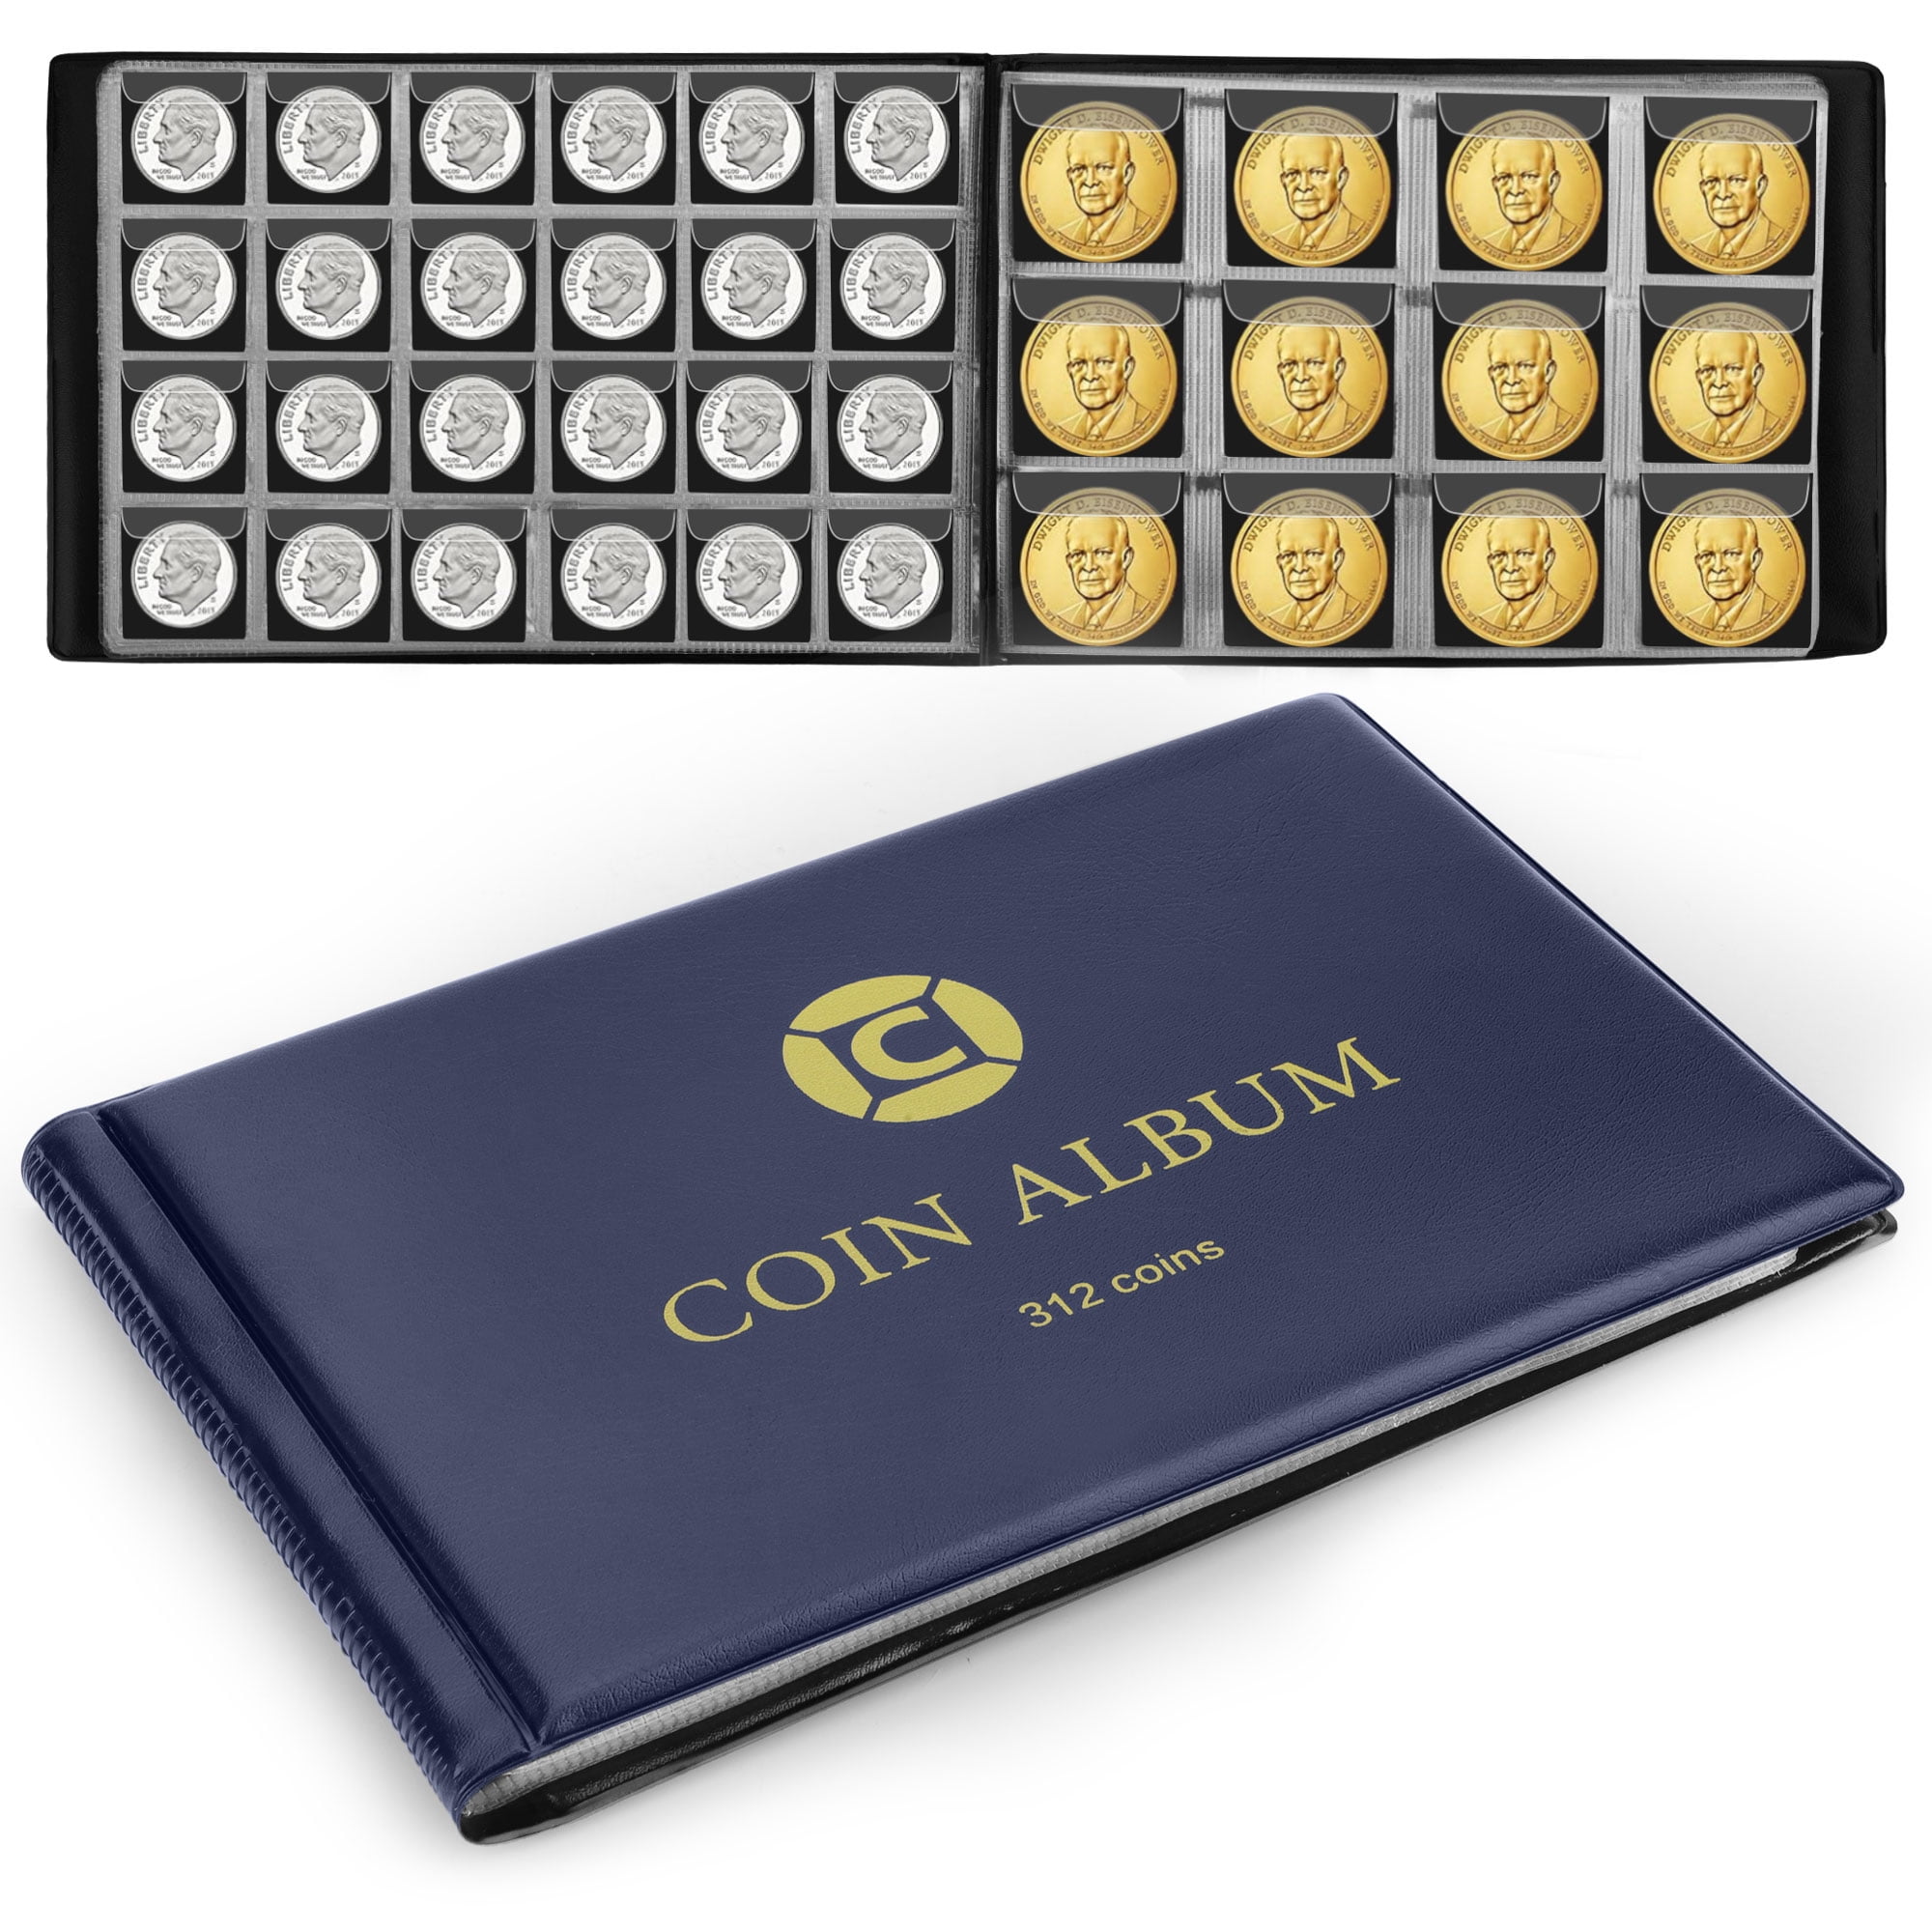 420 Pockets Coin Albums - 28x29 mm/1.1x1.1 inch Pocket Black Coin Book 10 Pages Coin Collection Holder Letter Size Coin Storage Book CS0242BK